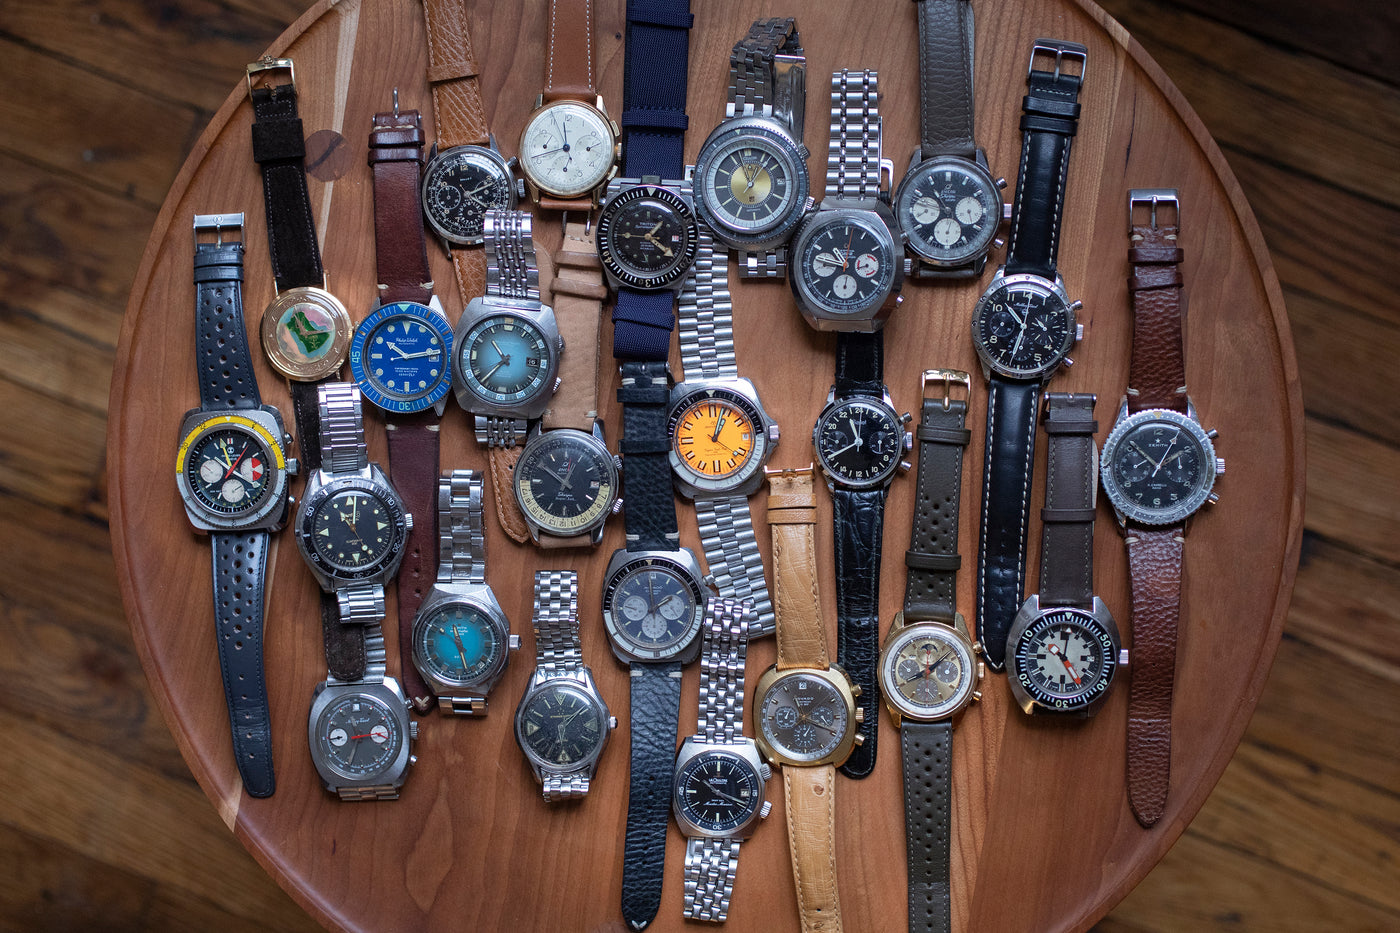 Is it the end of wrist watches era?